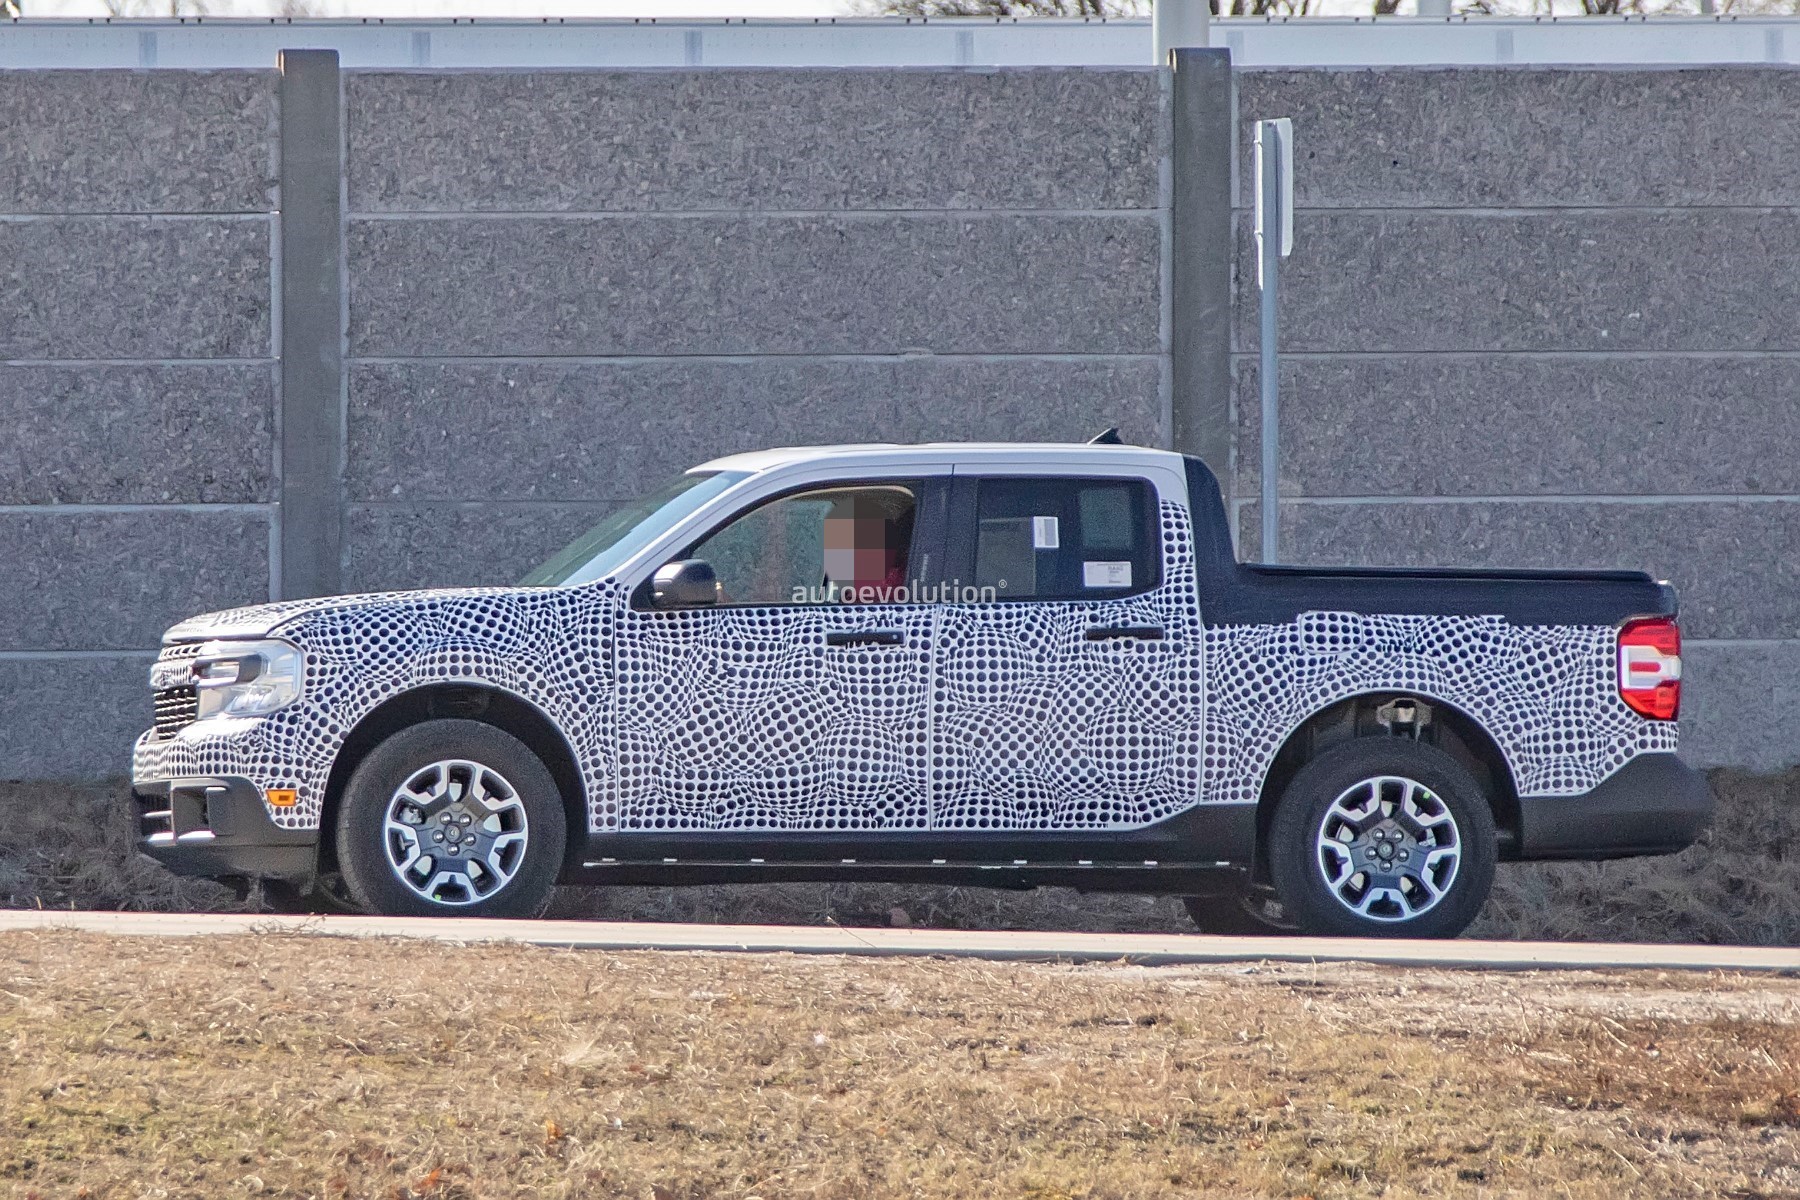 2022 Ford Maverick Truck Reveal Event Confirmed for June 8th